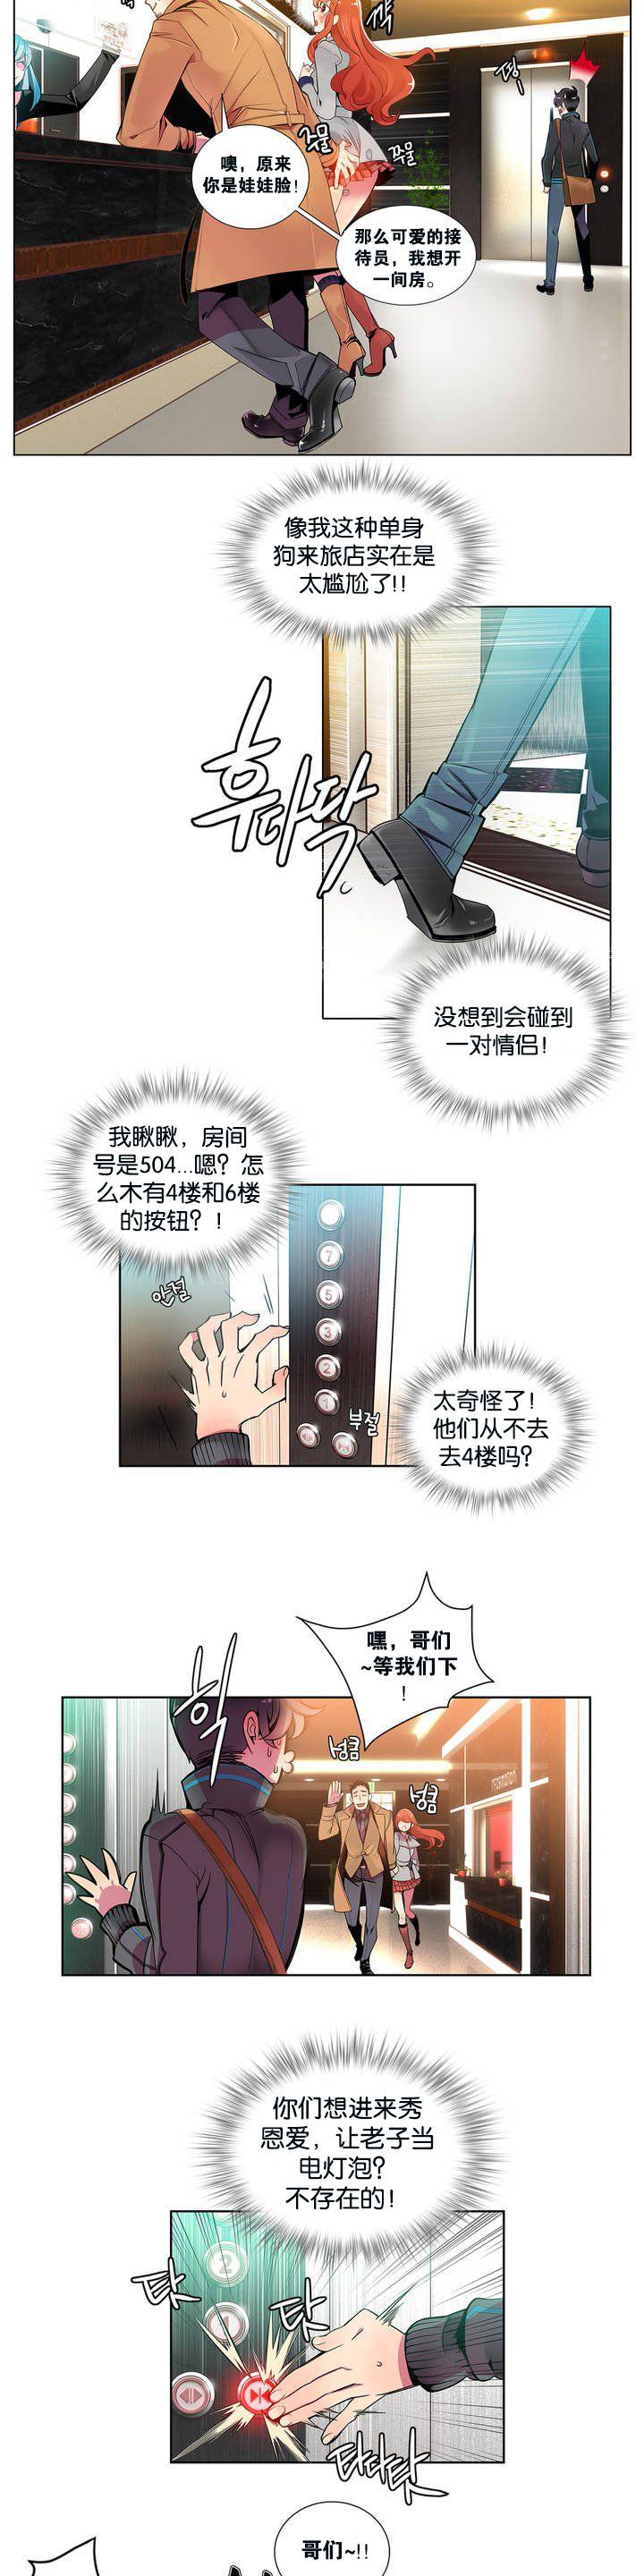 Housewife [Juder] 莉莉丝的纽带(Lilith`s Cord) Ch.1-15 [Chinese] Family Taboo - Page 8